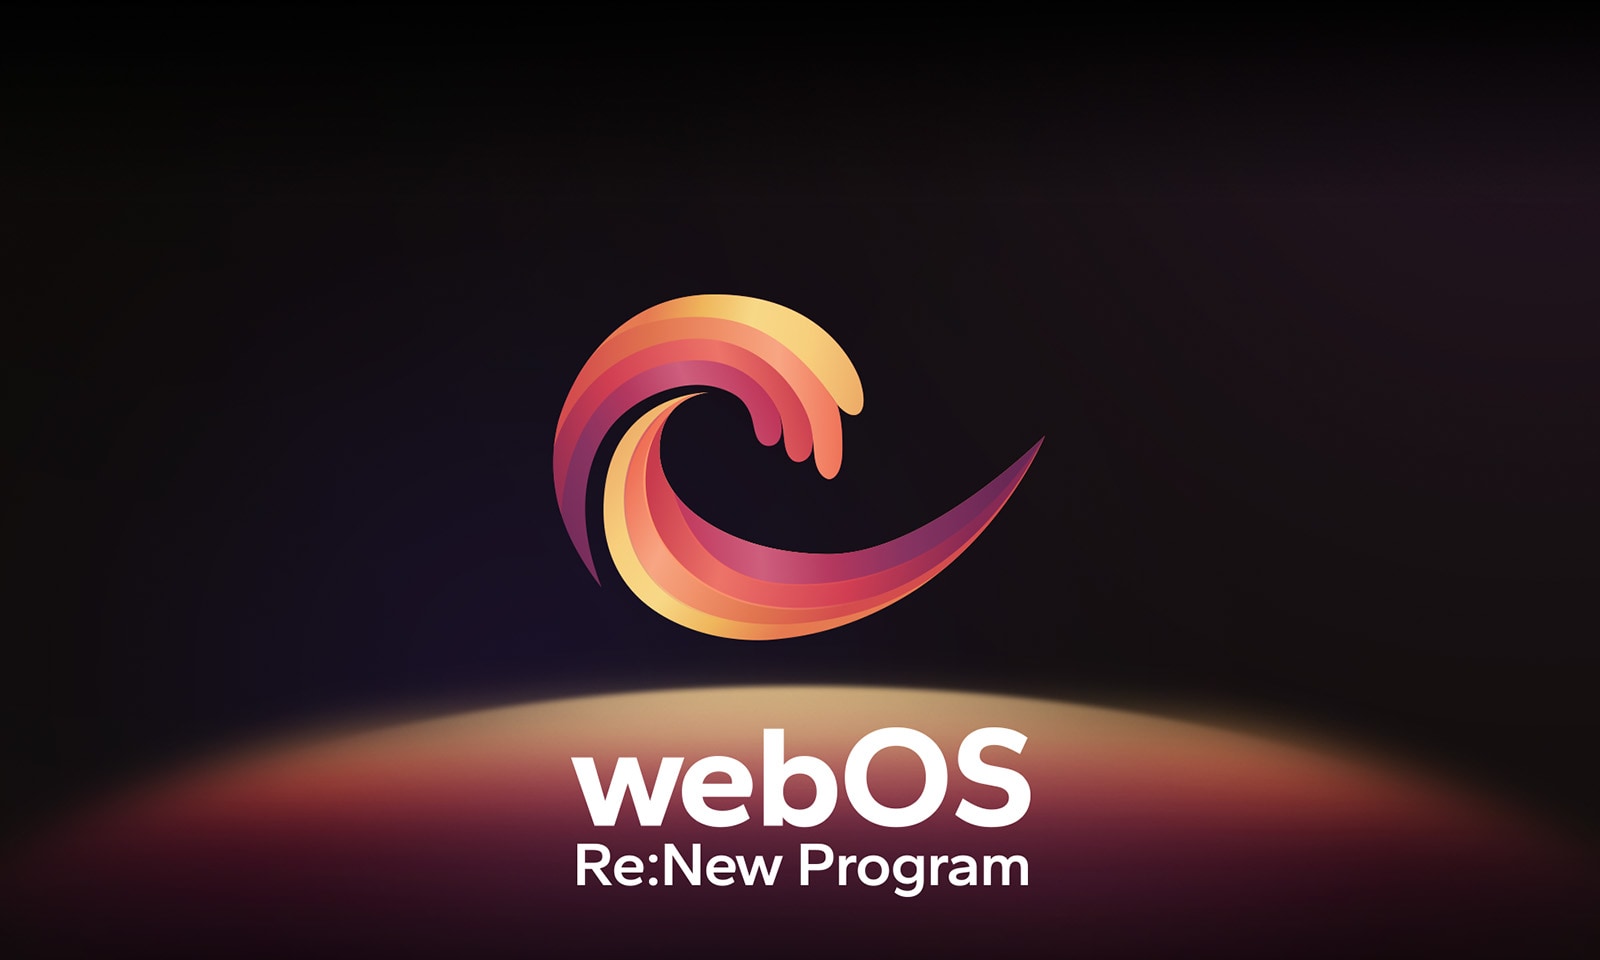 An image of the webOS Re:New Program logo against a black background with the top of a blue and purple circular sphere at the bottom. 	